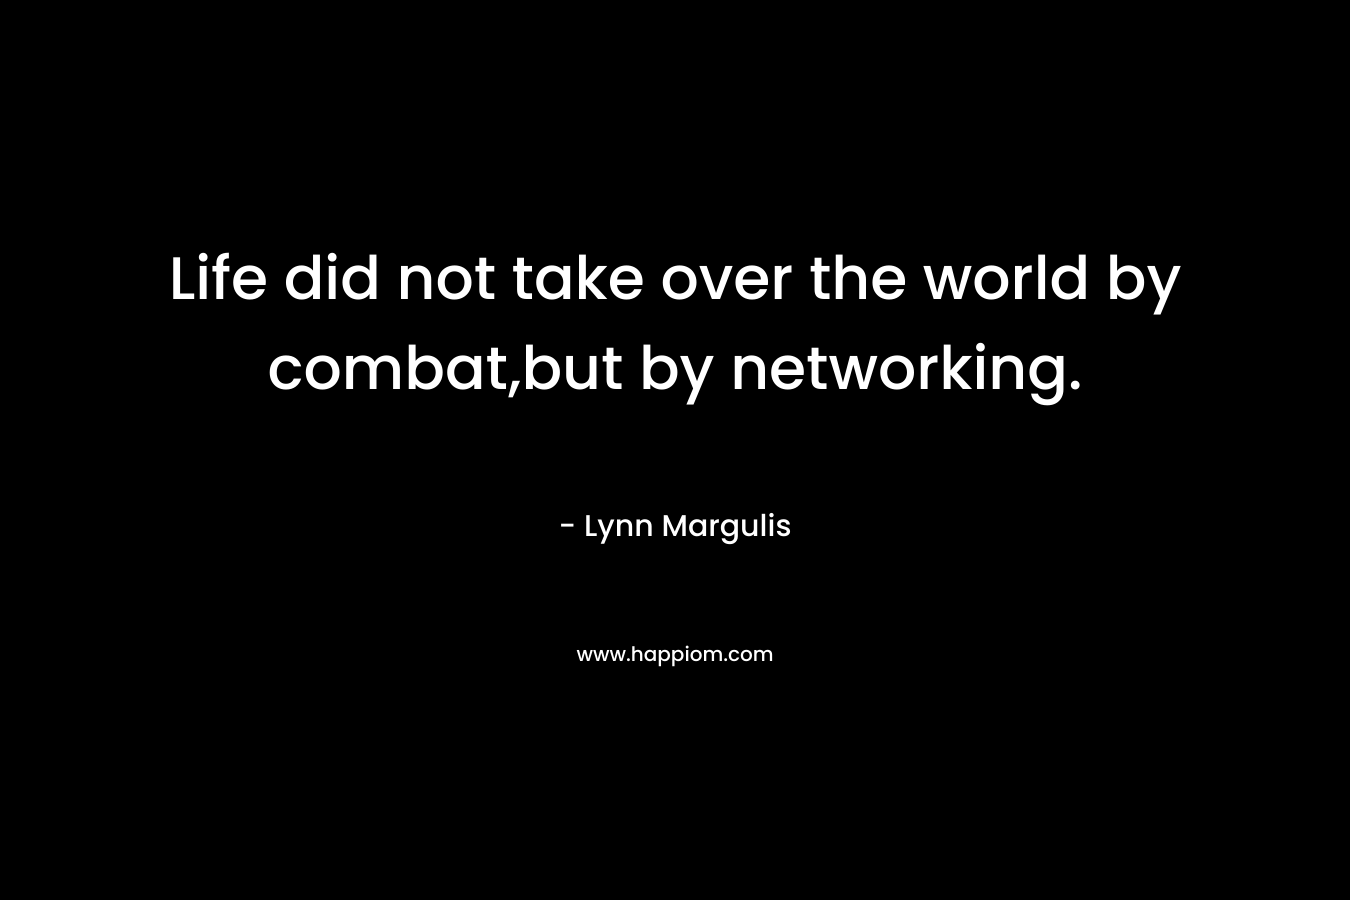 Life did not take over the world by combat,but by networking. – Lynn Margulis